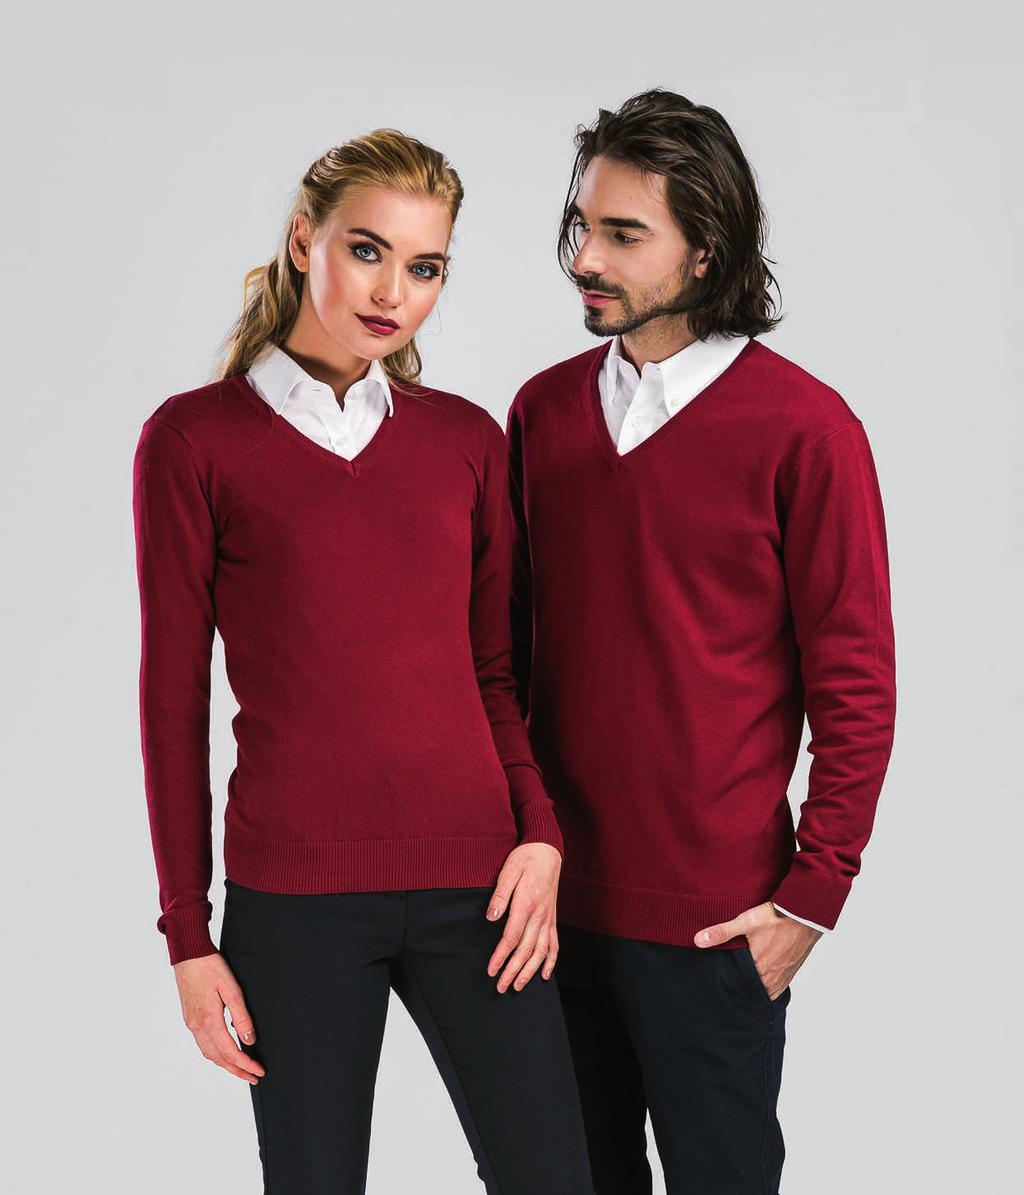 54 TH Clothes 2019 / SELECTION / Milan + Milan Women "V-neck" jumpers are essential to classy